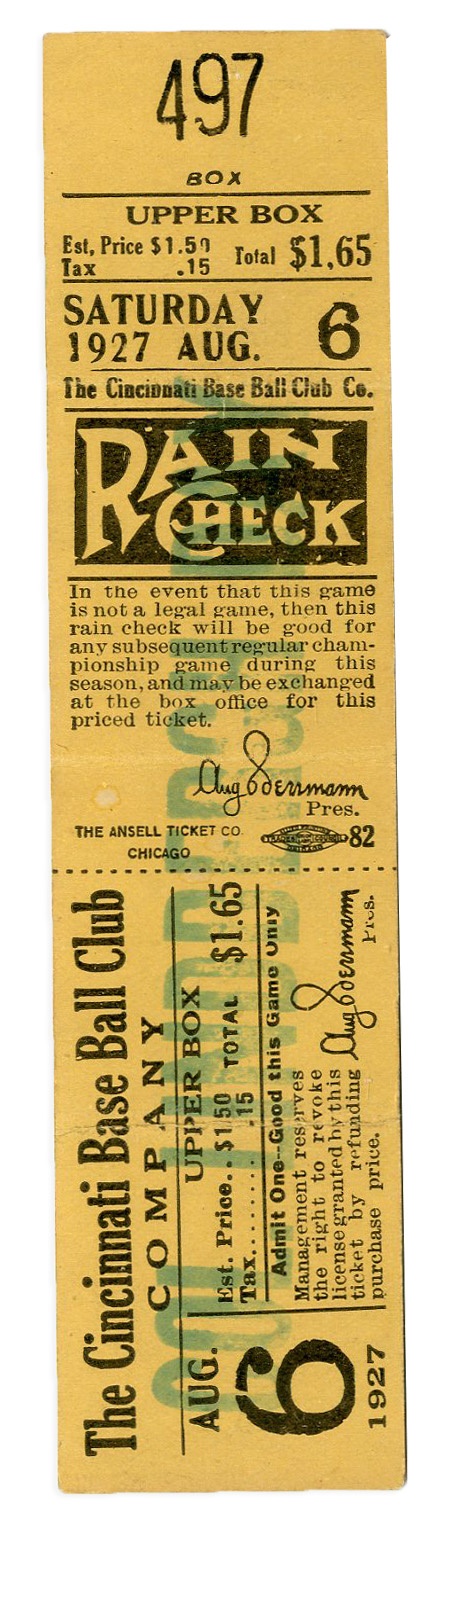 Tickets, Publications & Pins - Lucky Lindy Comes Heralded at Crosley Field Unused Cincinnati Reds Baseball Ticket (1927)